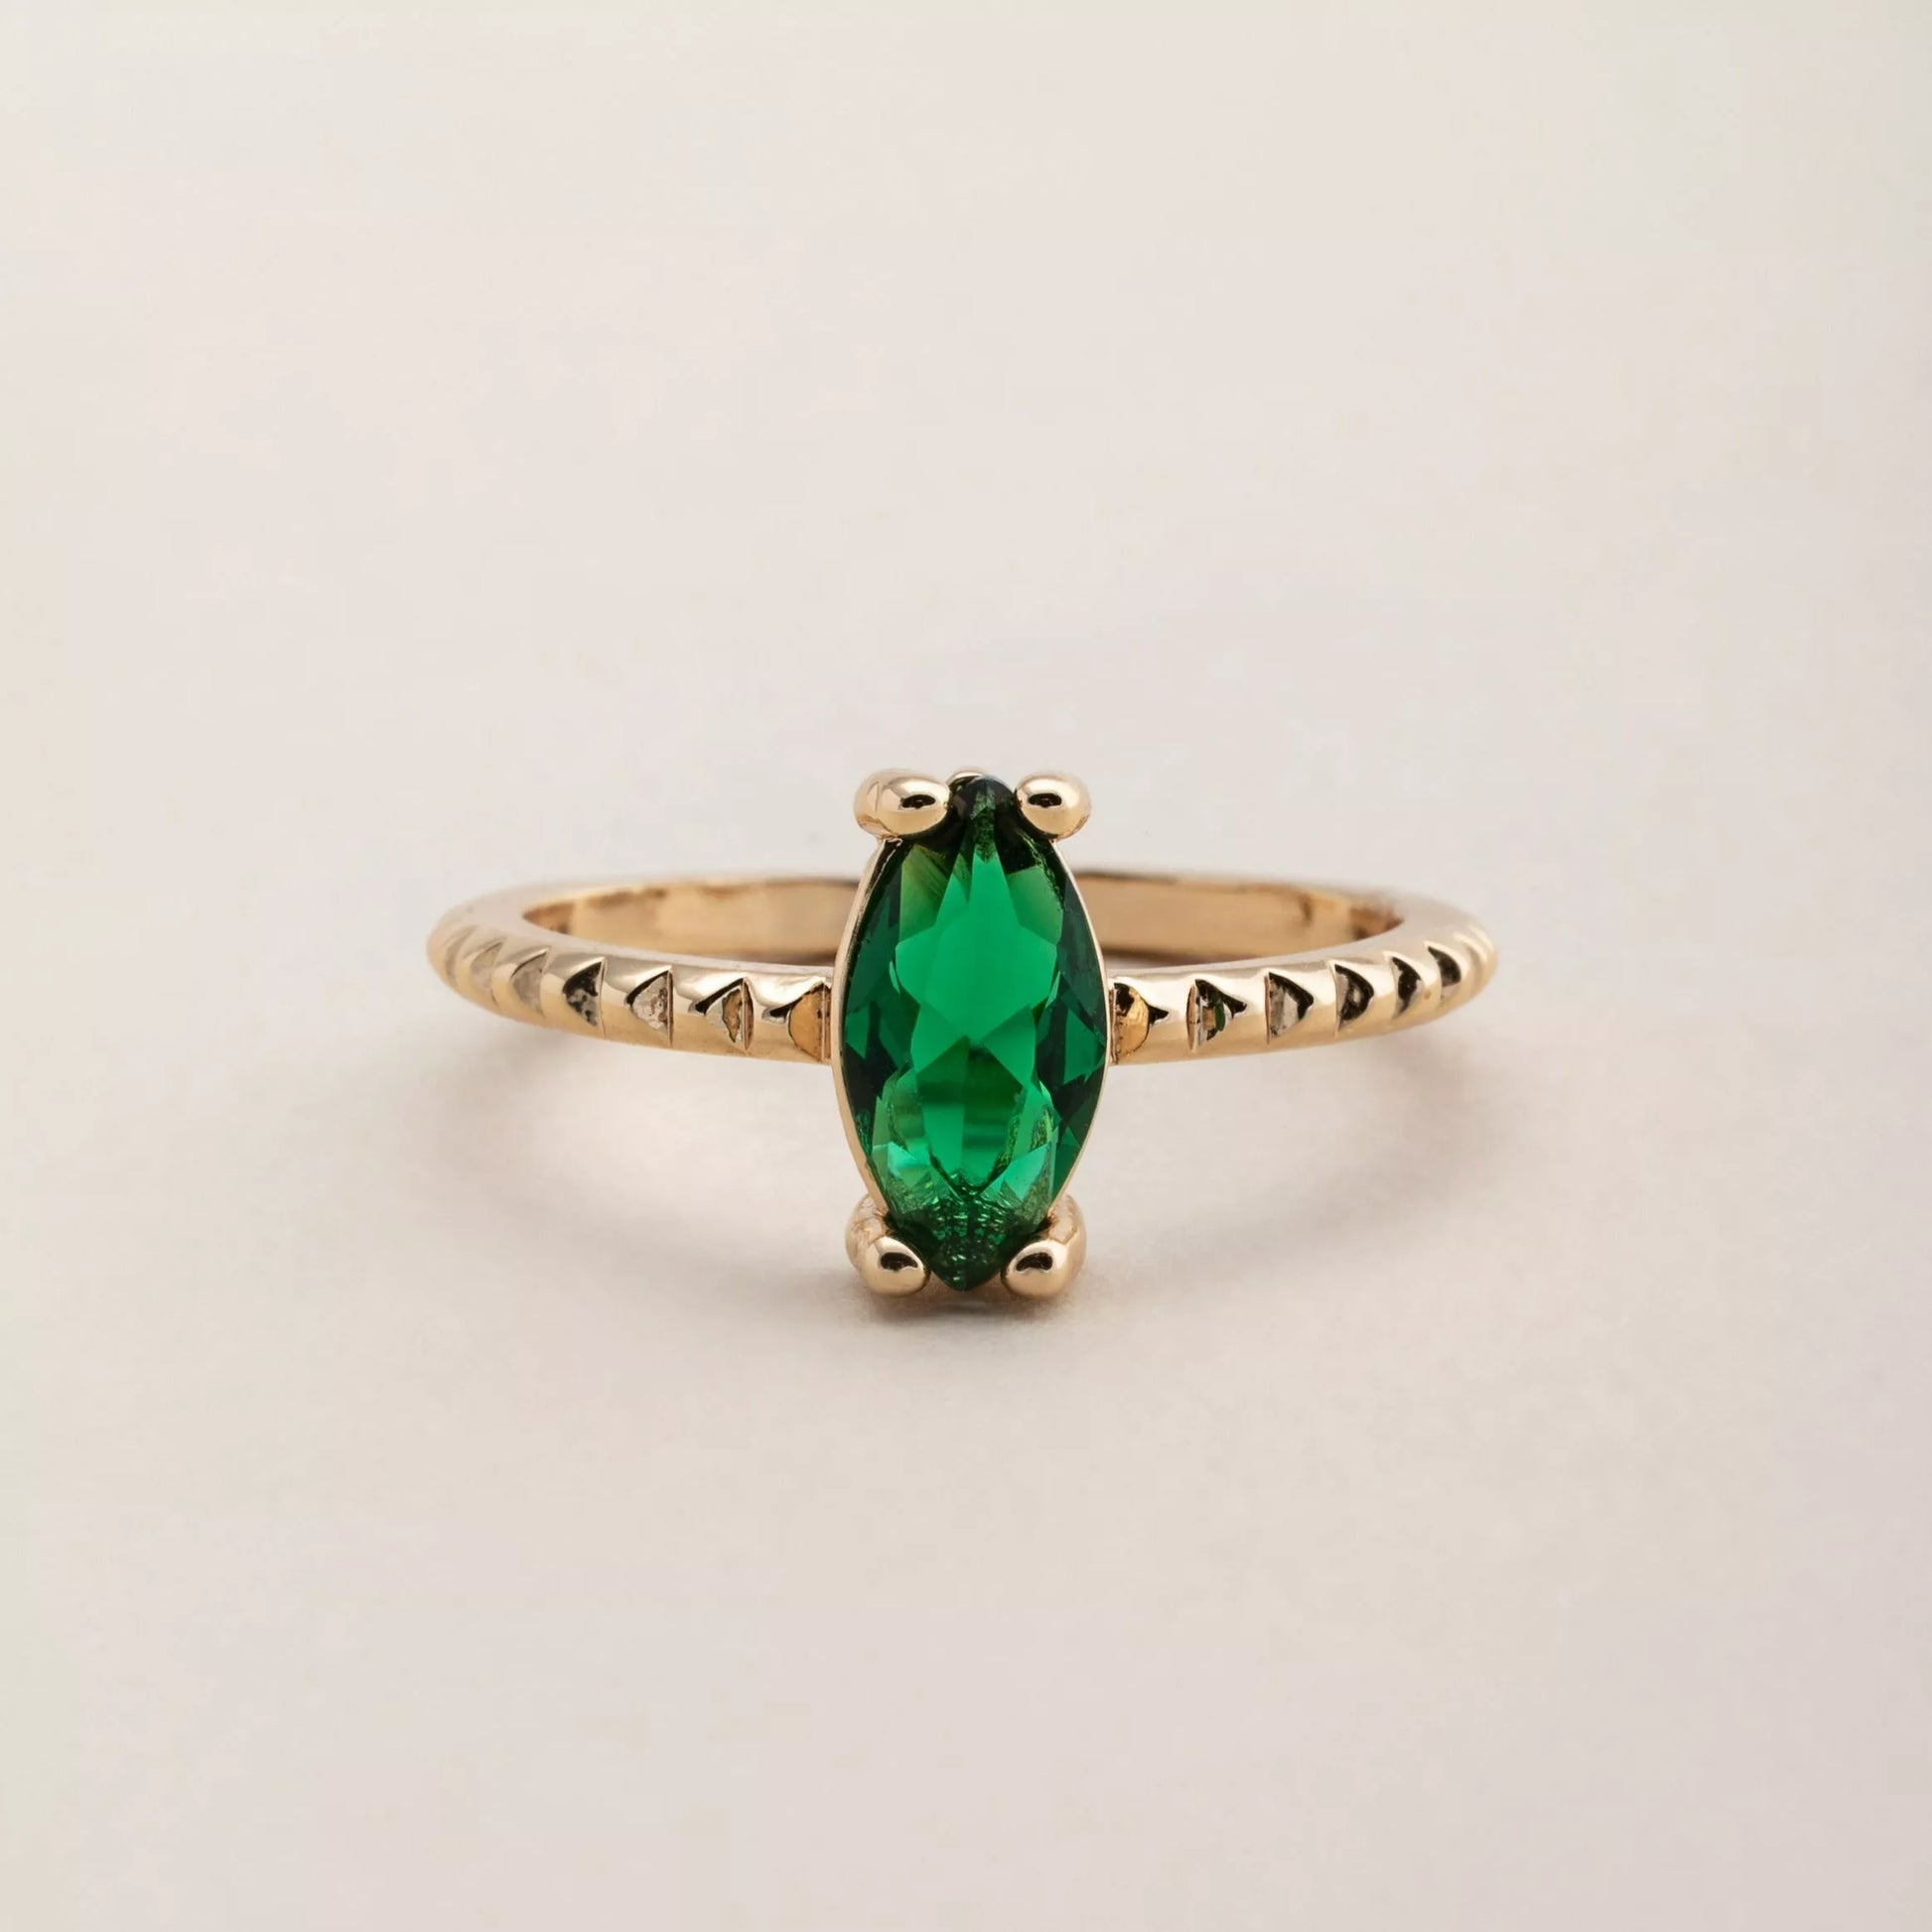 The Emerald Marquise Ring